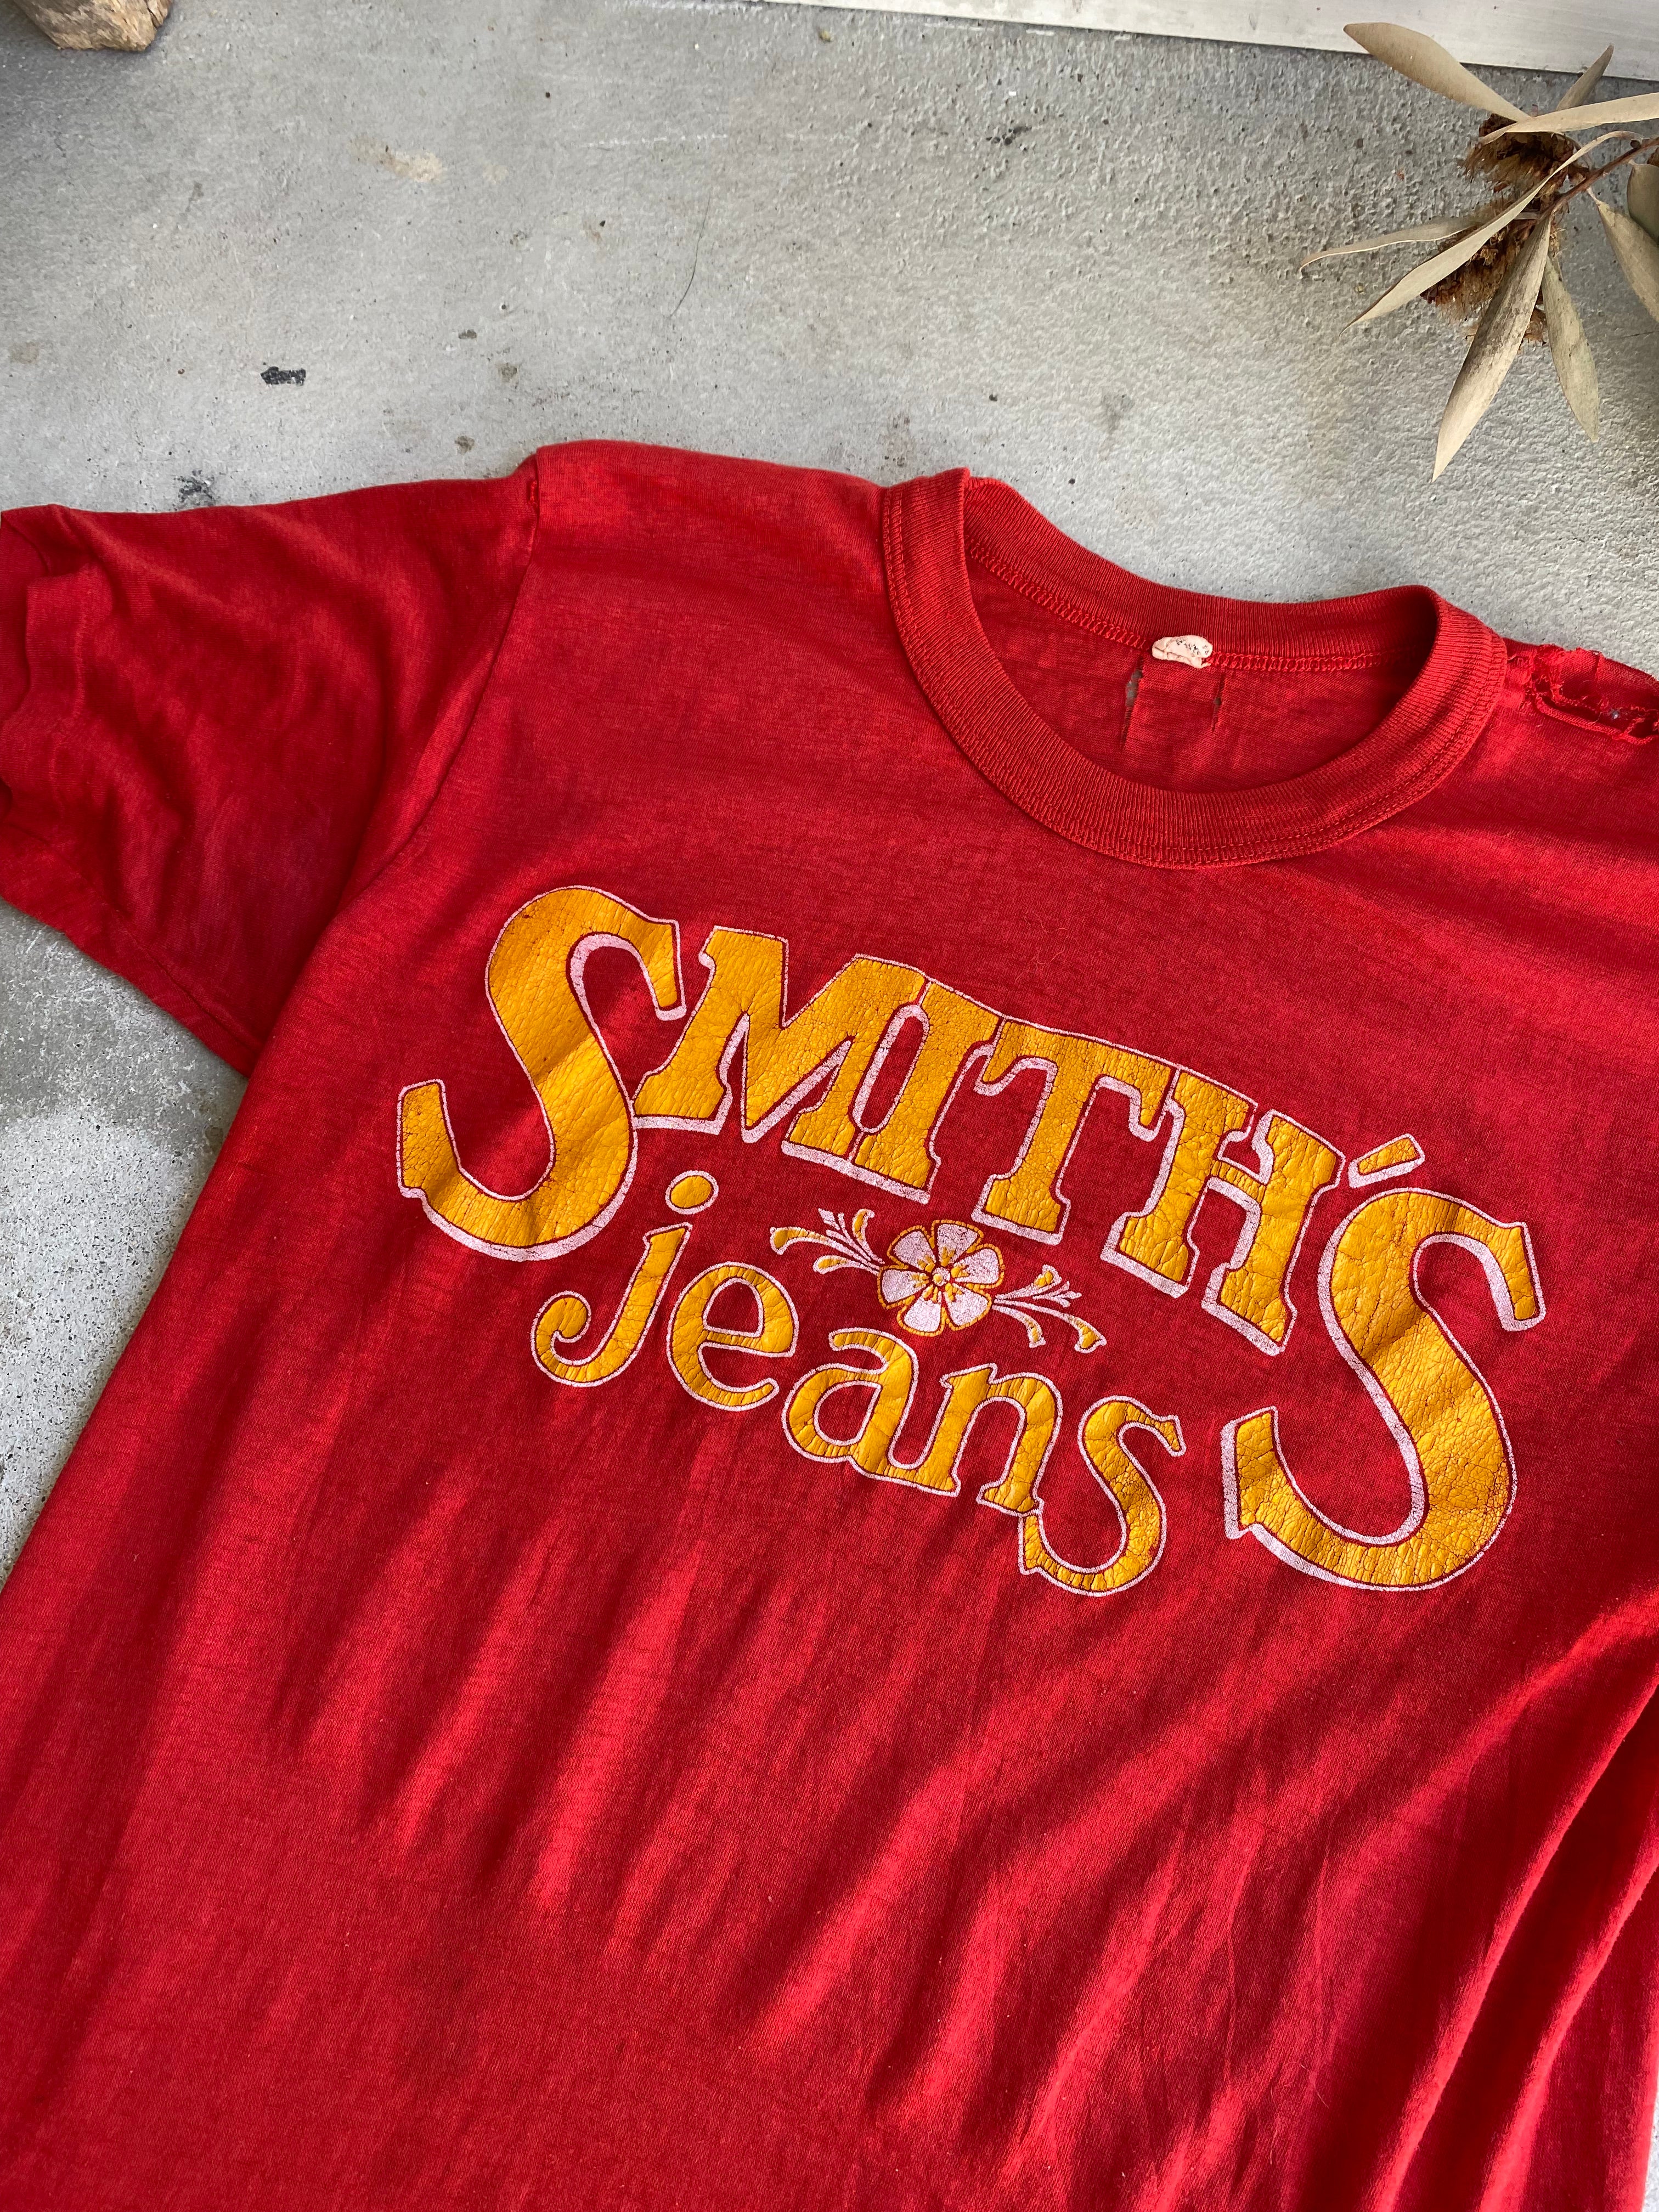 1980s Smith's Jeans T-Shirt (S/M)